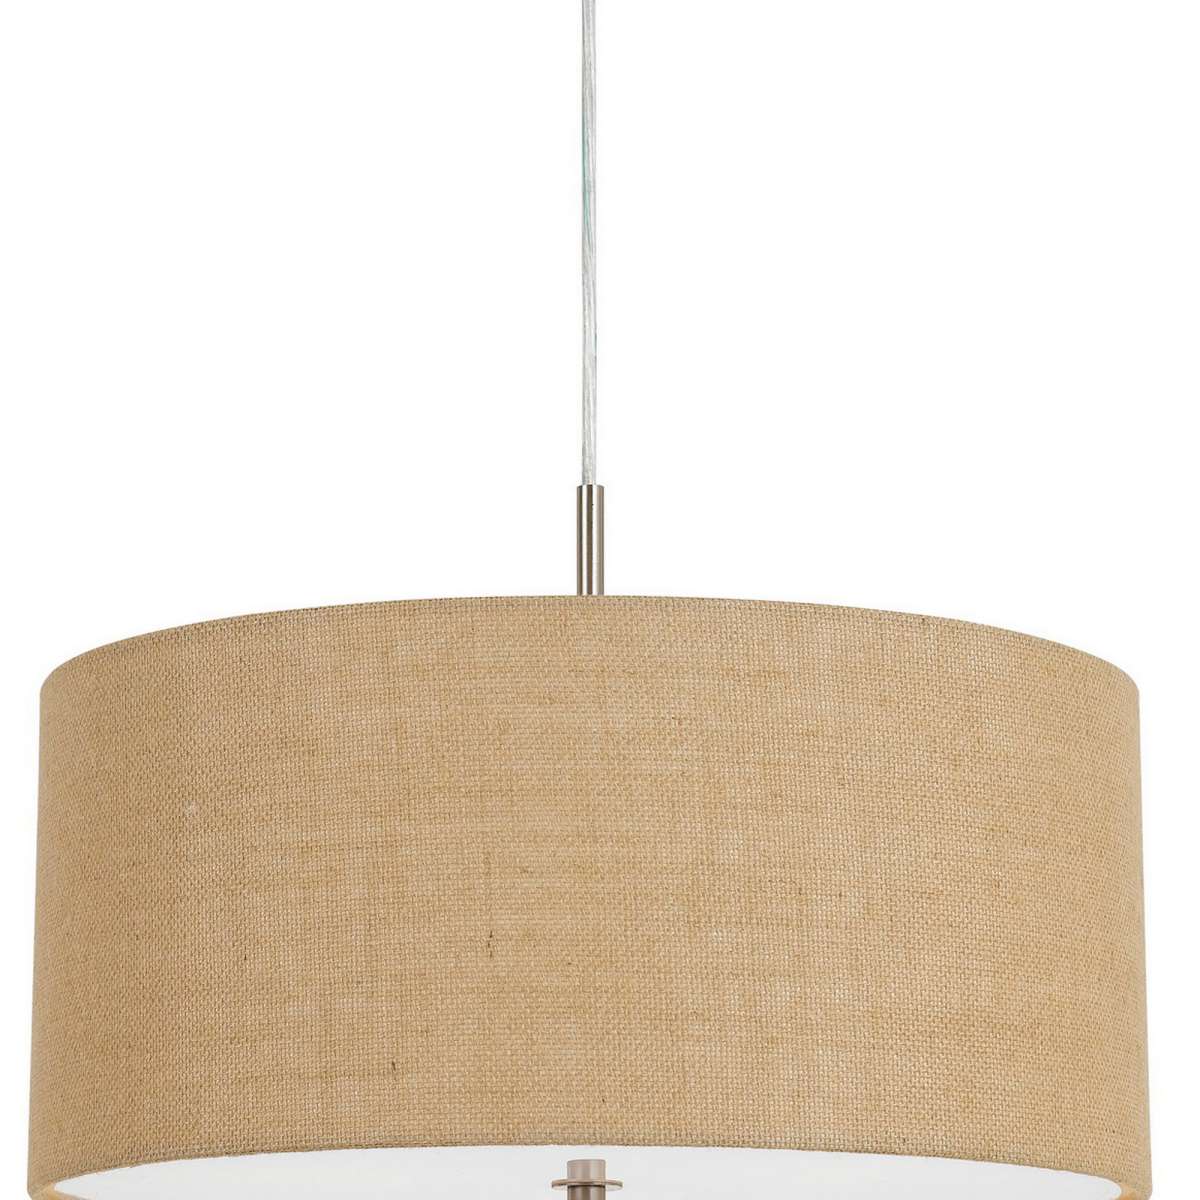 Metal Pendant Lighting With Fabric Circular Drum Shade And Cord, Beige By Benzara